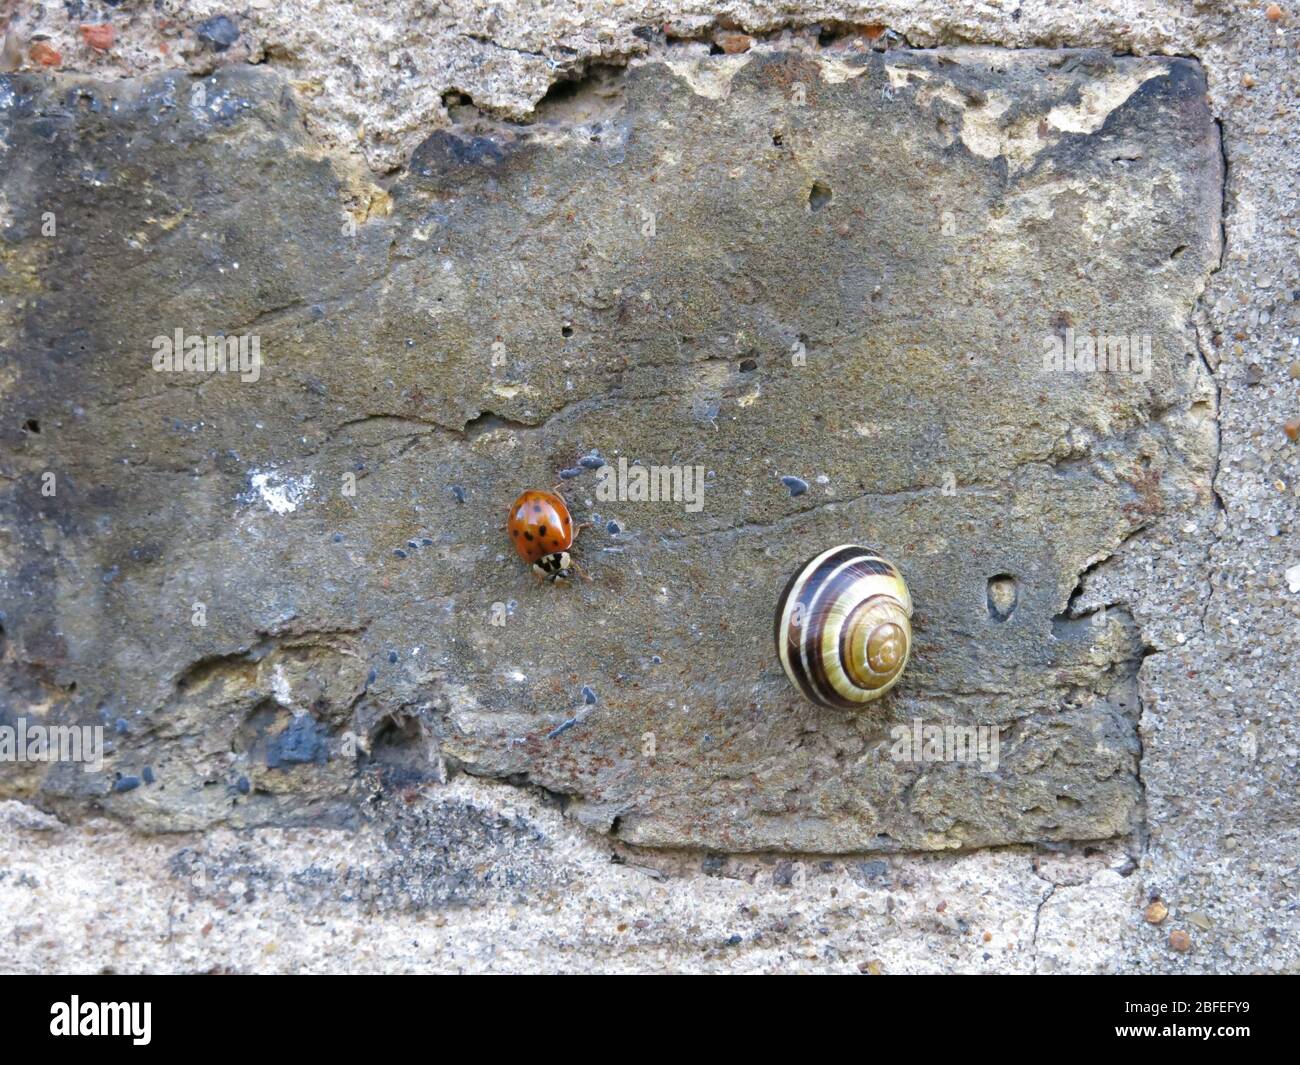 an abstract image showing a striped shell of a snail and a ladybird upon a textured slab of concrete Stock Photo